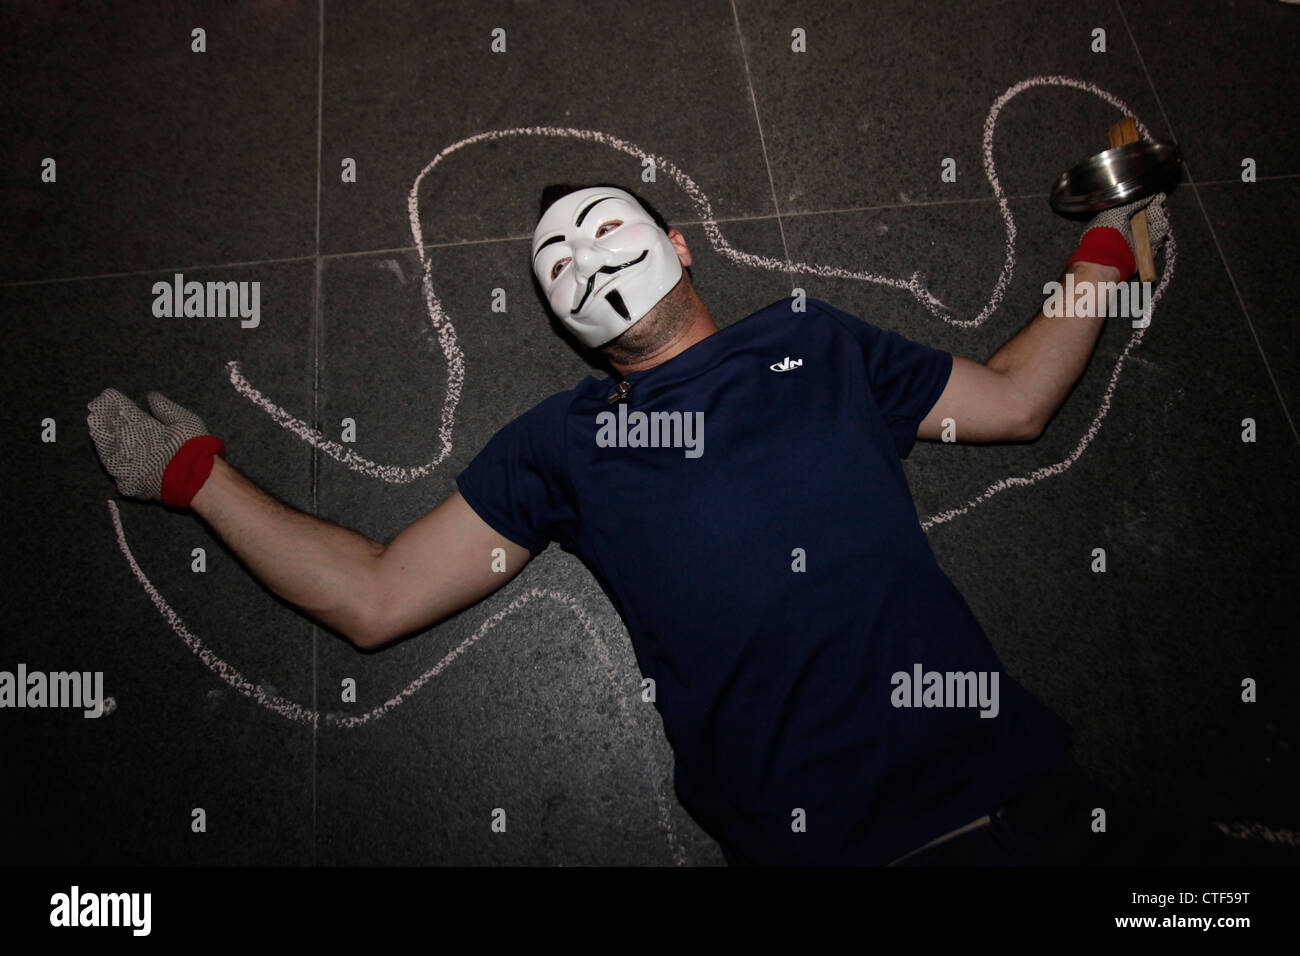 A members of the group Anonymous wearing Guy Fawkes mask laying on the ground in front of a financial building during Cost of Living protest in Tel Aviv Israel. The Guy Fawkes mask is a well-known symbol for the online hacktivist group Anonymous used in anti-government and anti-establishment protests around the world. Stock Photo